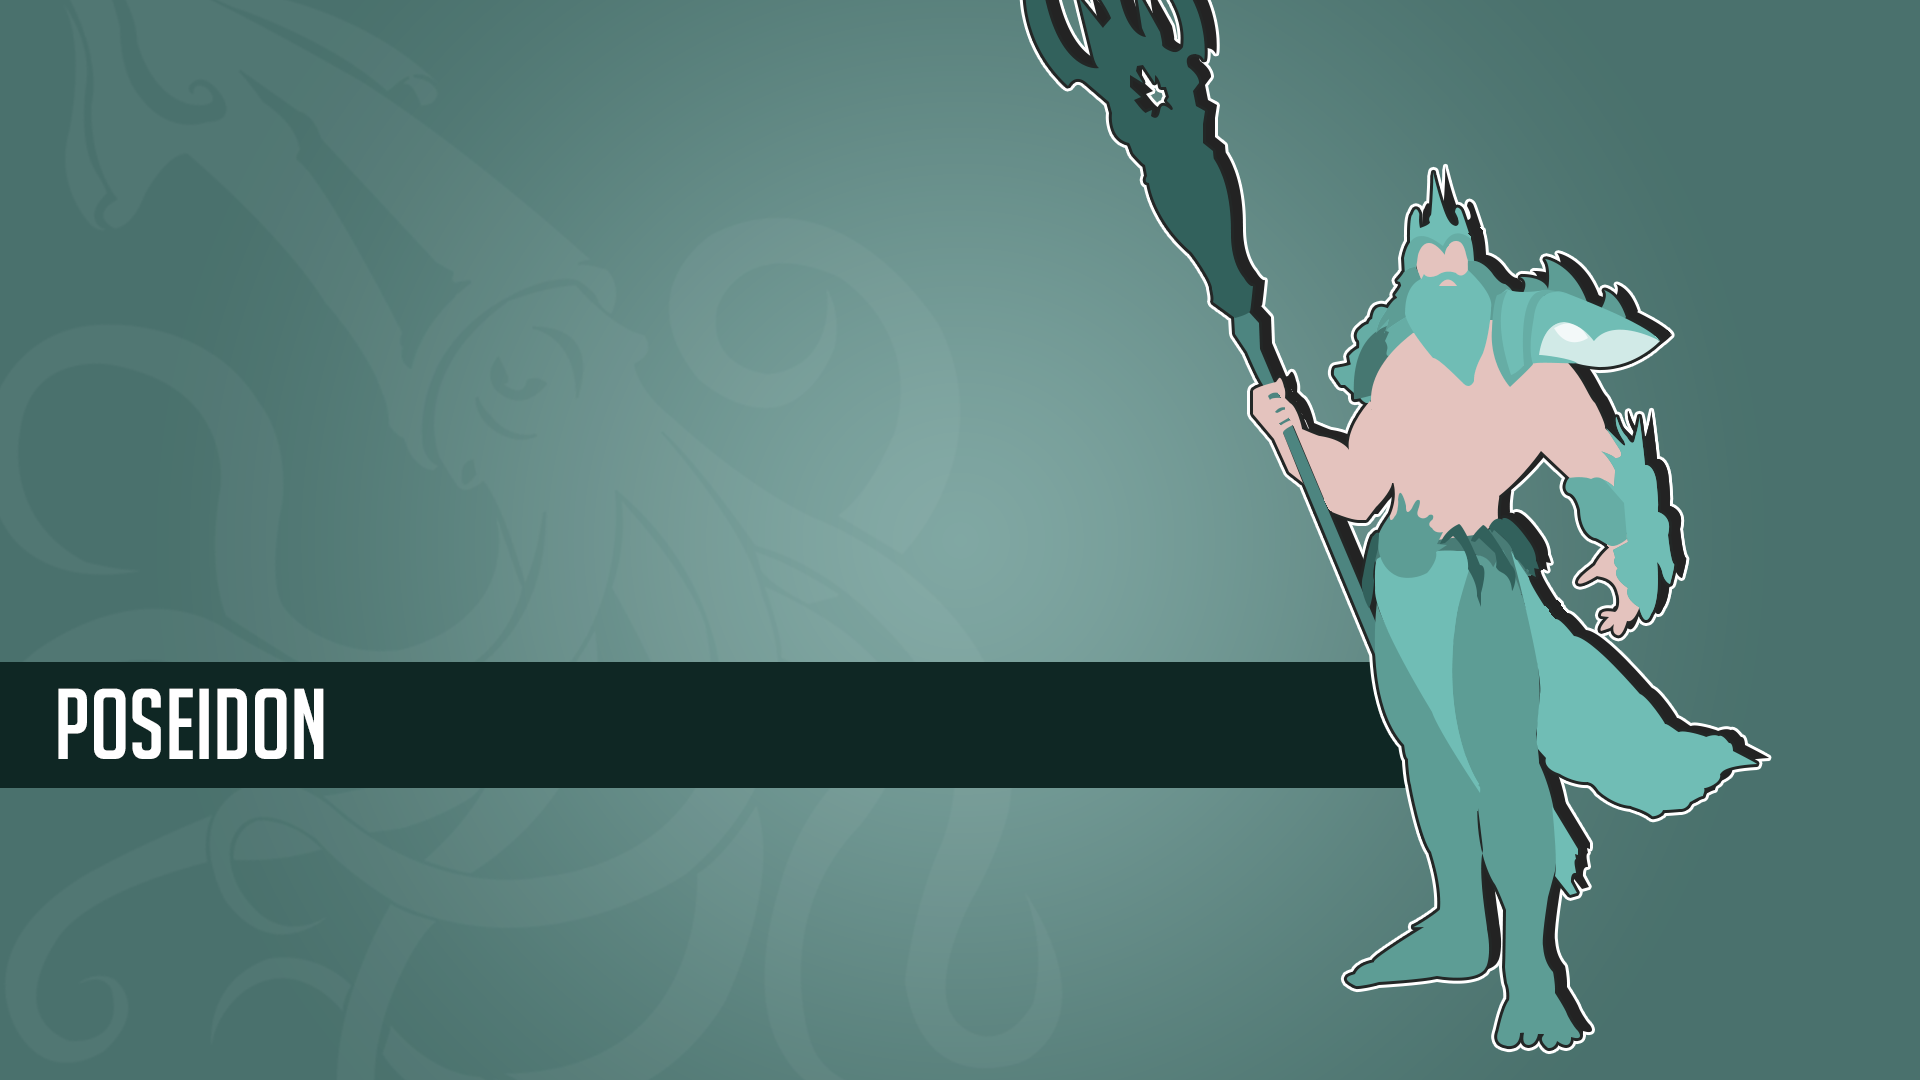 Poseidon Wallpaper by eNzyOfficial on DeviantArt